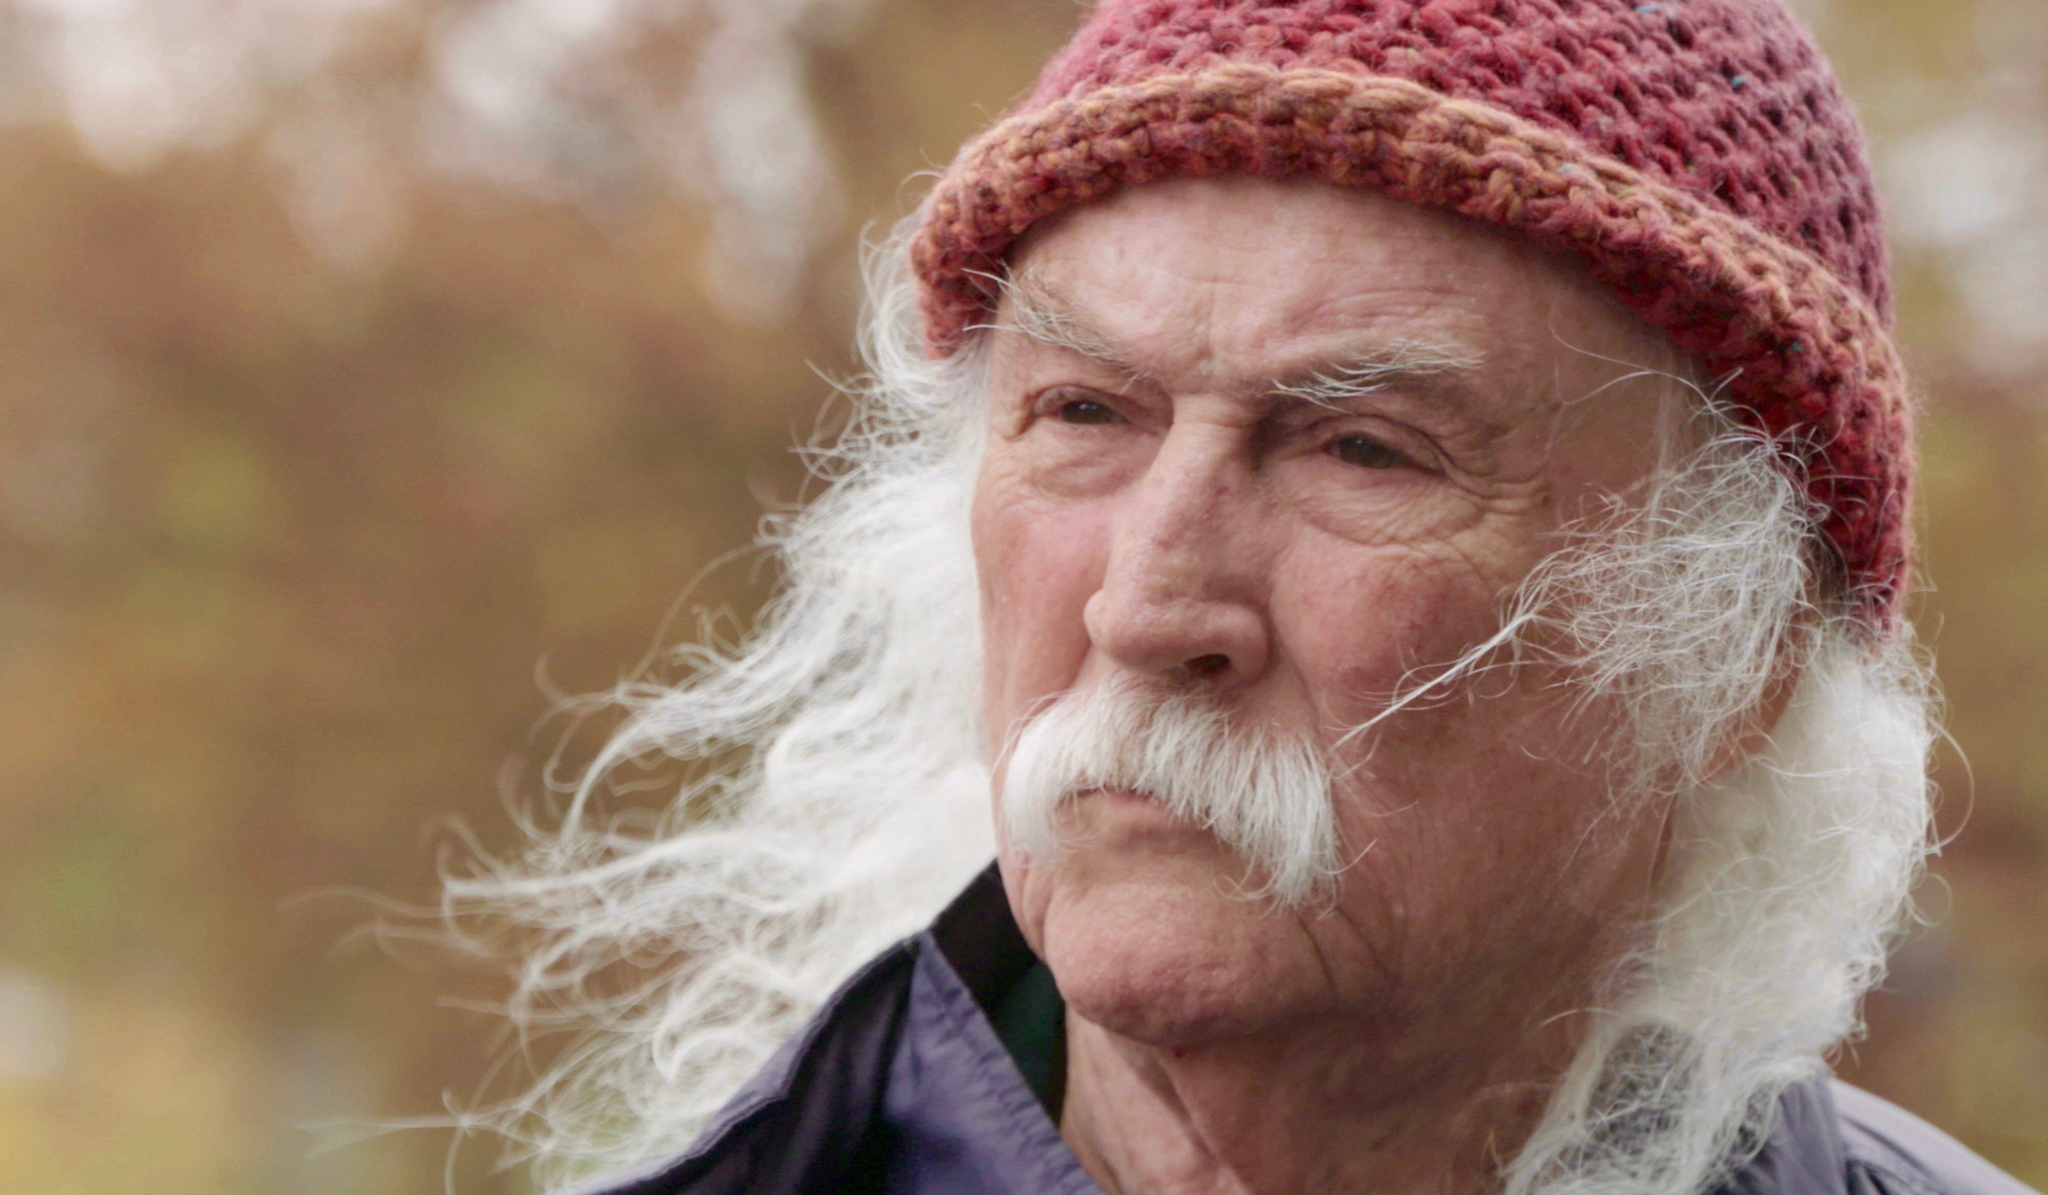 David Crosby appears in David Crosby: Remember My Name by AJ Eaton, an official selection of the U.S. Documentary Competition at the 2019 Sundance Film Festival. Courtesy of Sundance Institute | photo by AJ Eaton.